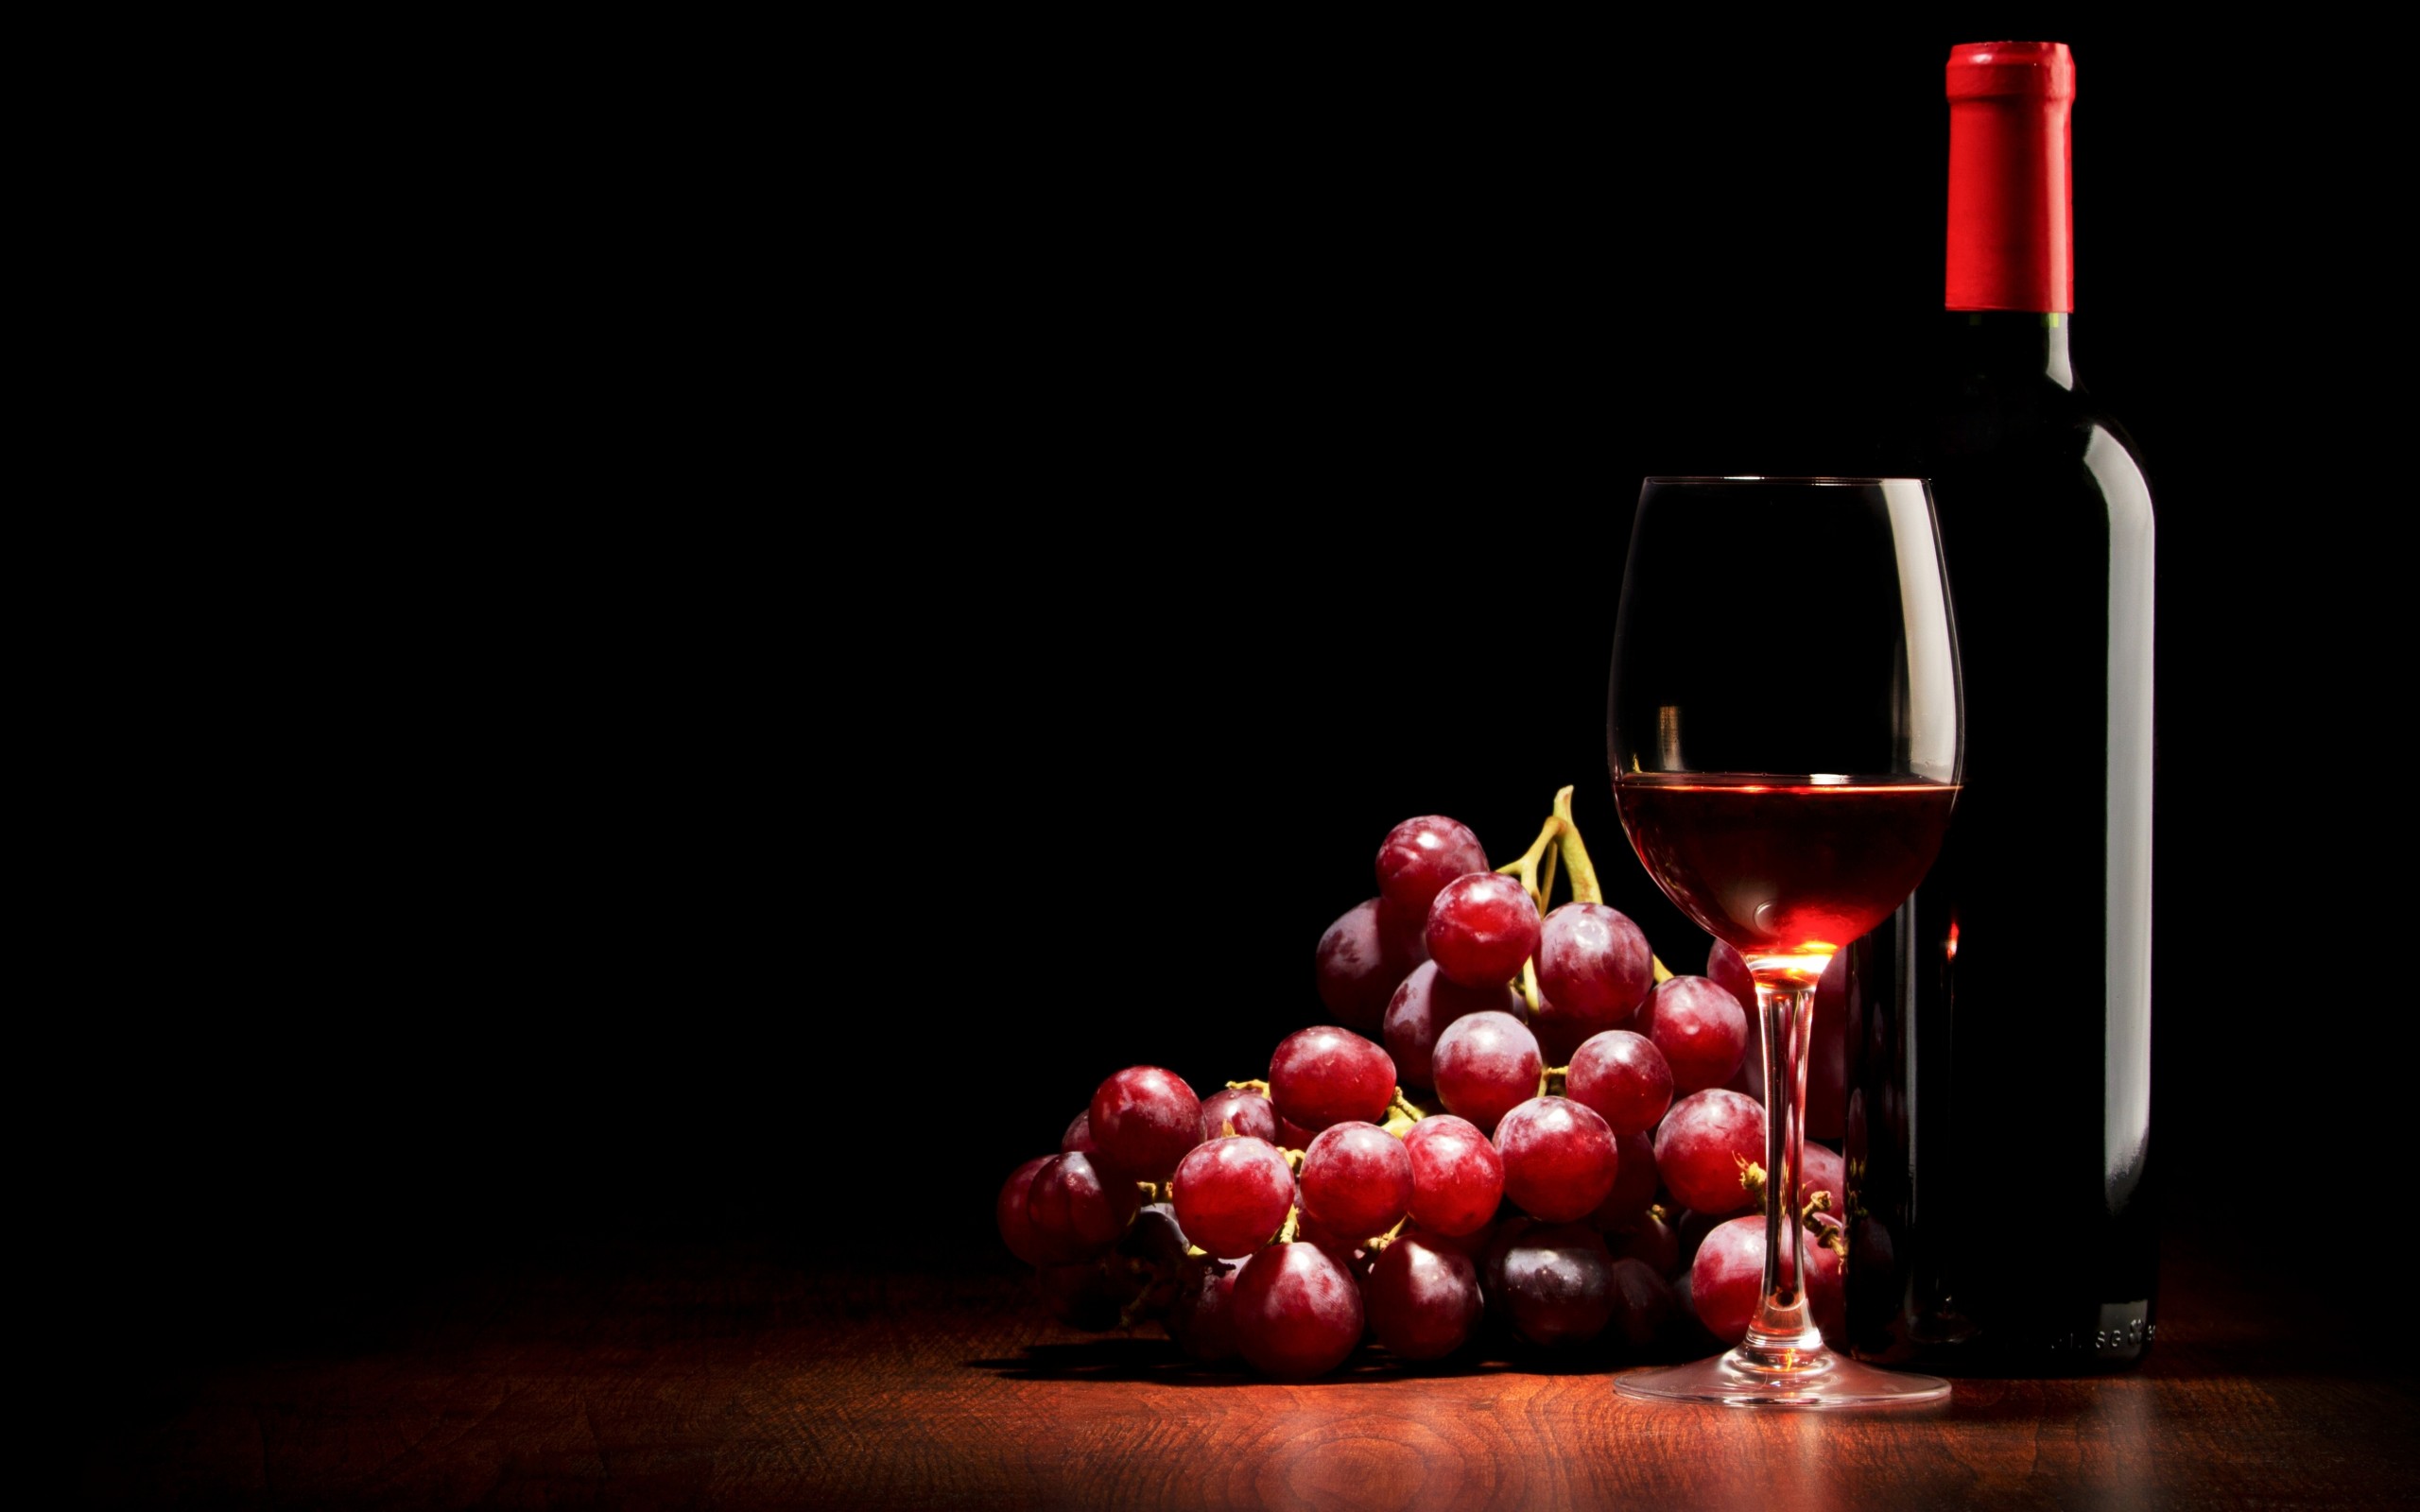 Wine Drink Grapes Dark Food Alcohol Still Life Fruit Simple Background Bottles Red Wine Red Grapes 2560x1600